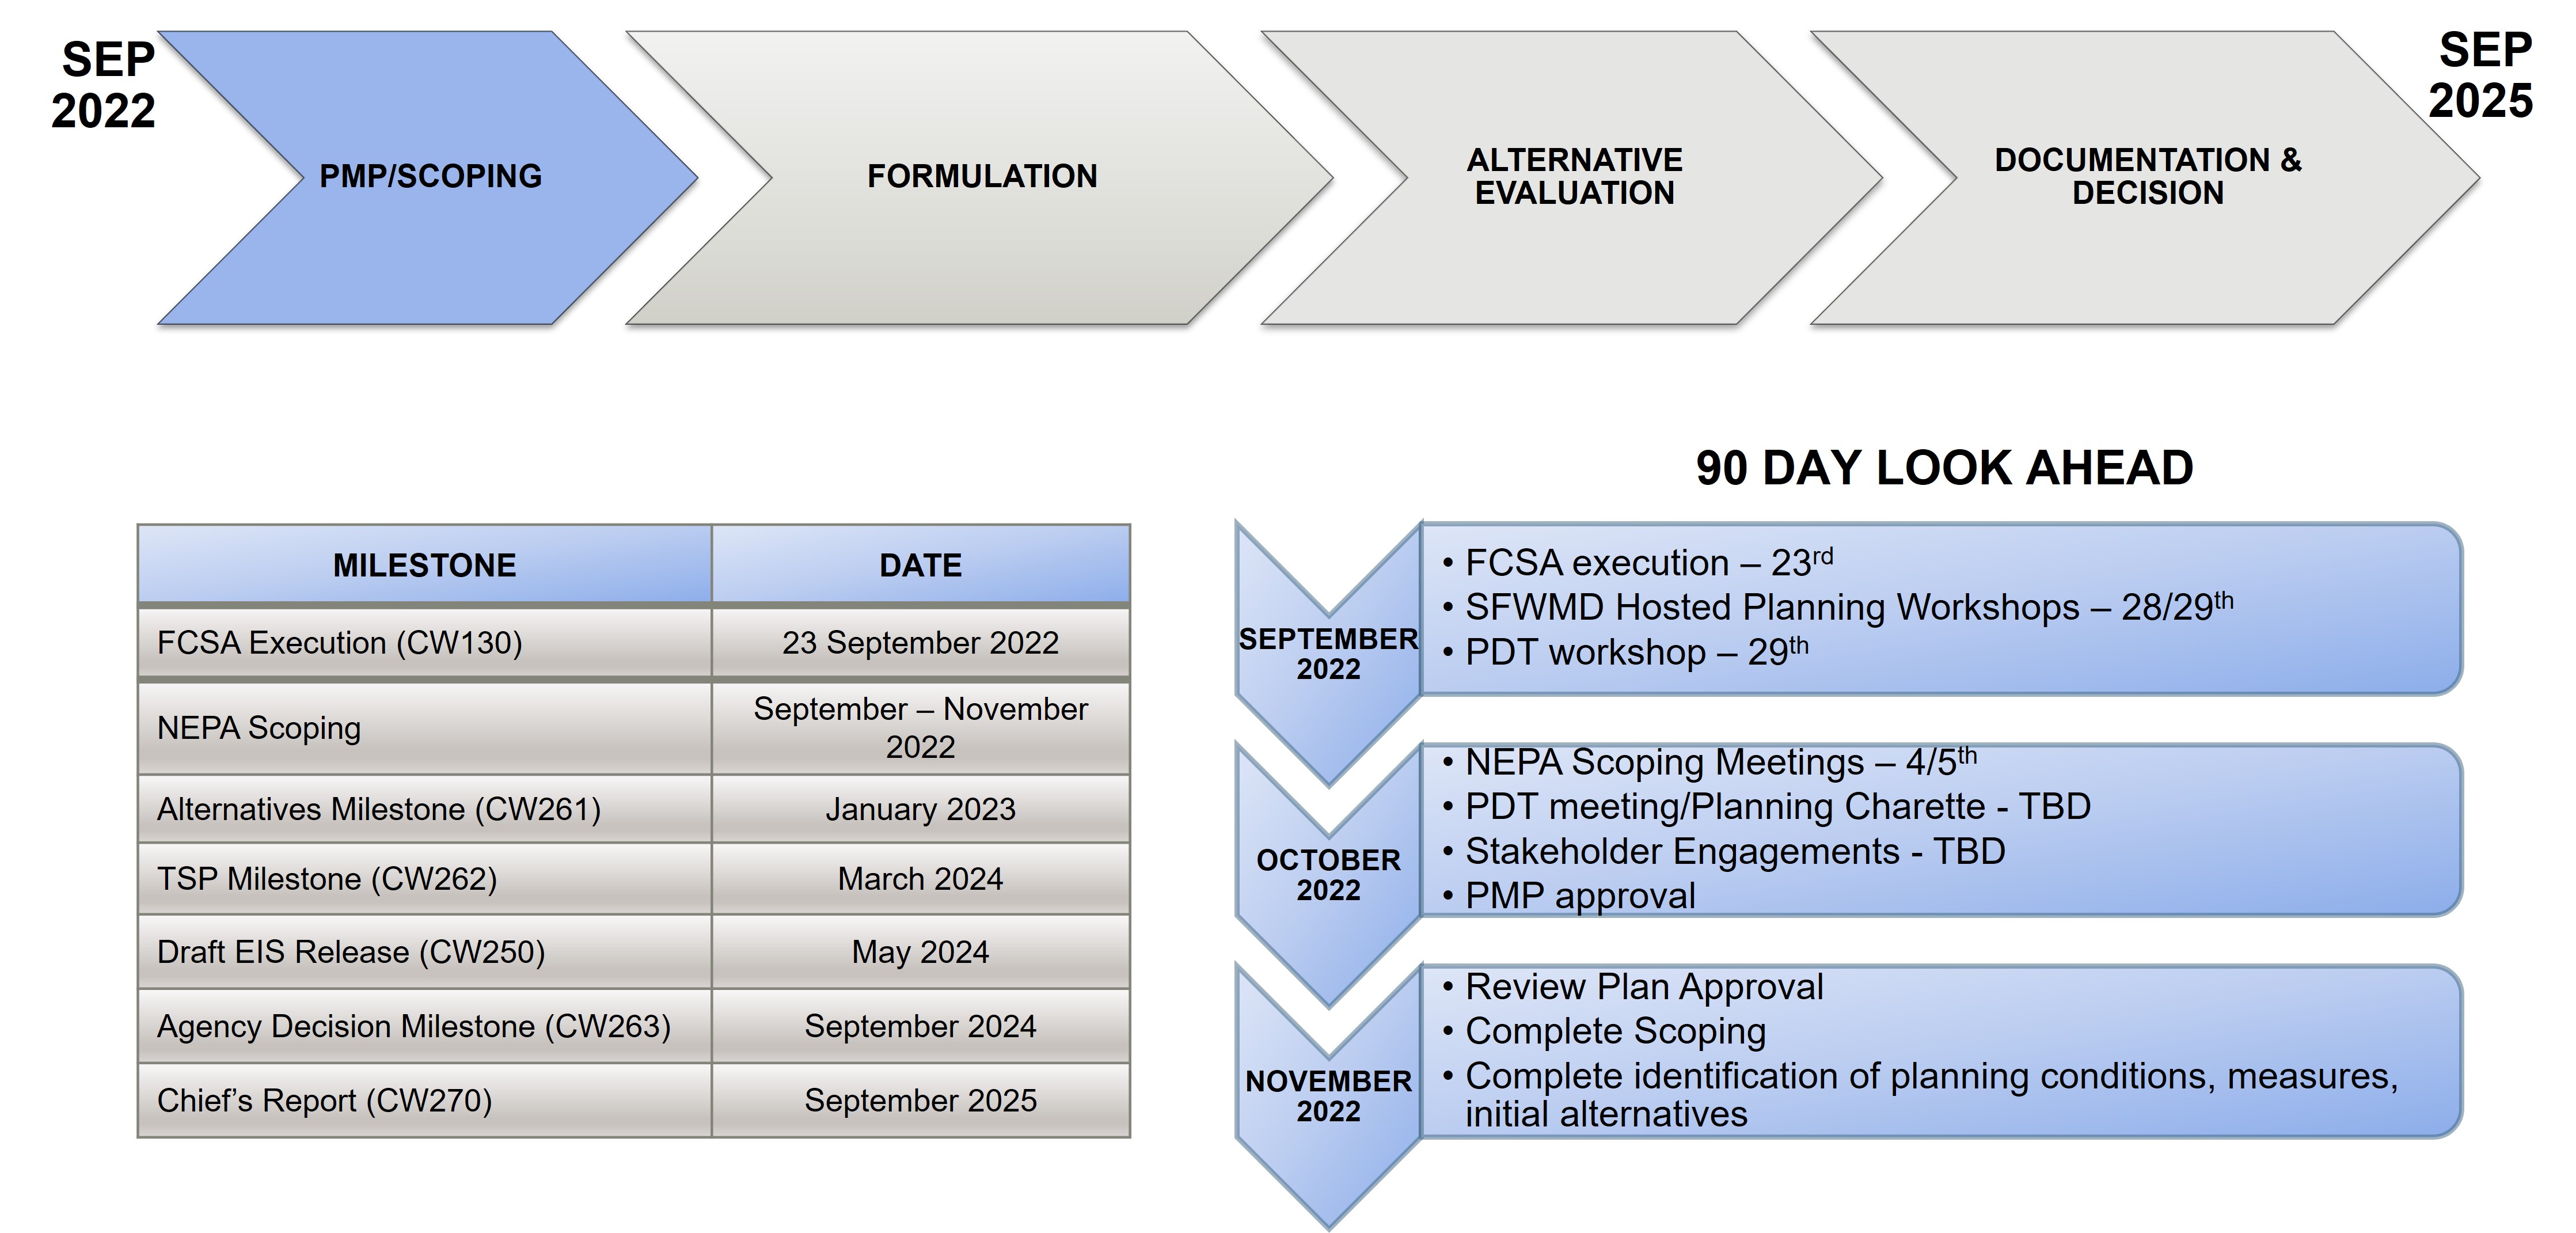 Graphic showing the C&SF Study Schedule. Major areas are PMP/Scoping, formulation, alternative evaluation, and documentation and decision. The milestones include FSCA Execution Sept 2022, NEPA scoping September to November 2022, alternatives milestones January 2023, TSP milestones March 2023, Draft EIS release May 2024, Agency Decision milestones September 2024, and chiefs report September 2025.